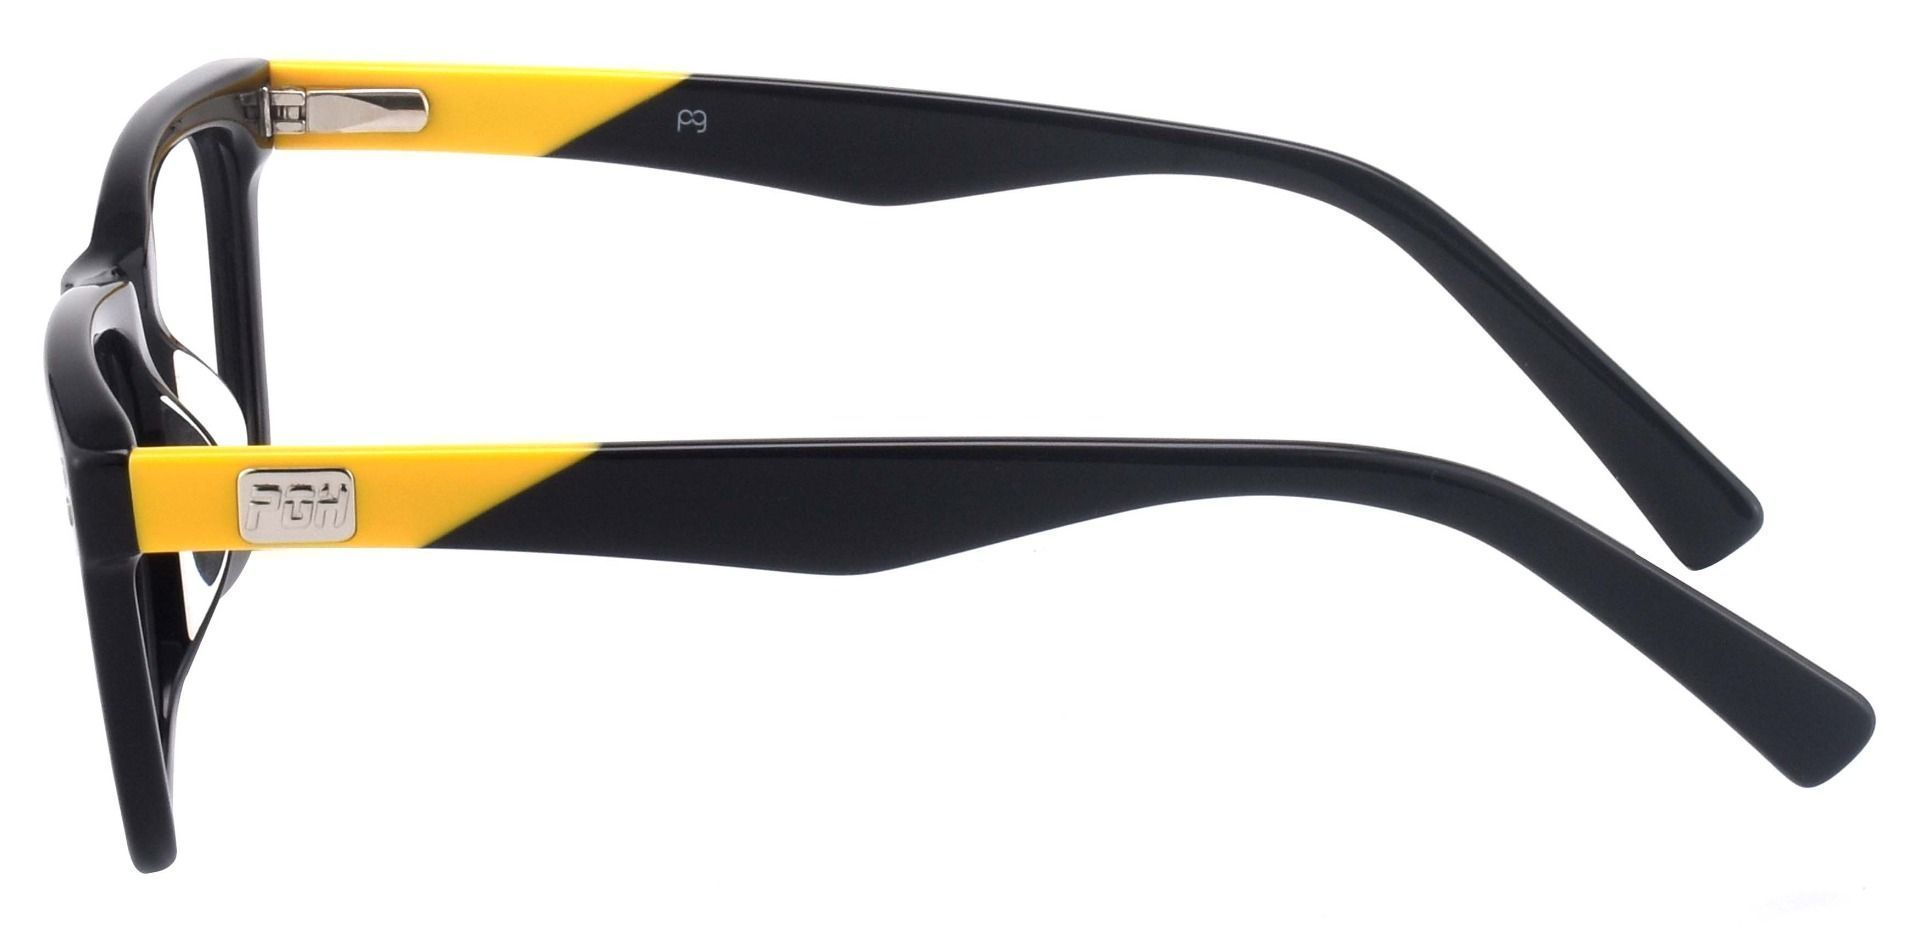 Liberty Rectangle Progressive Glasses - The Frame Is Black And Gold